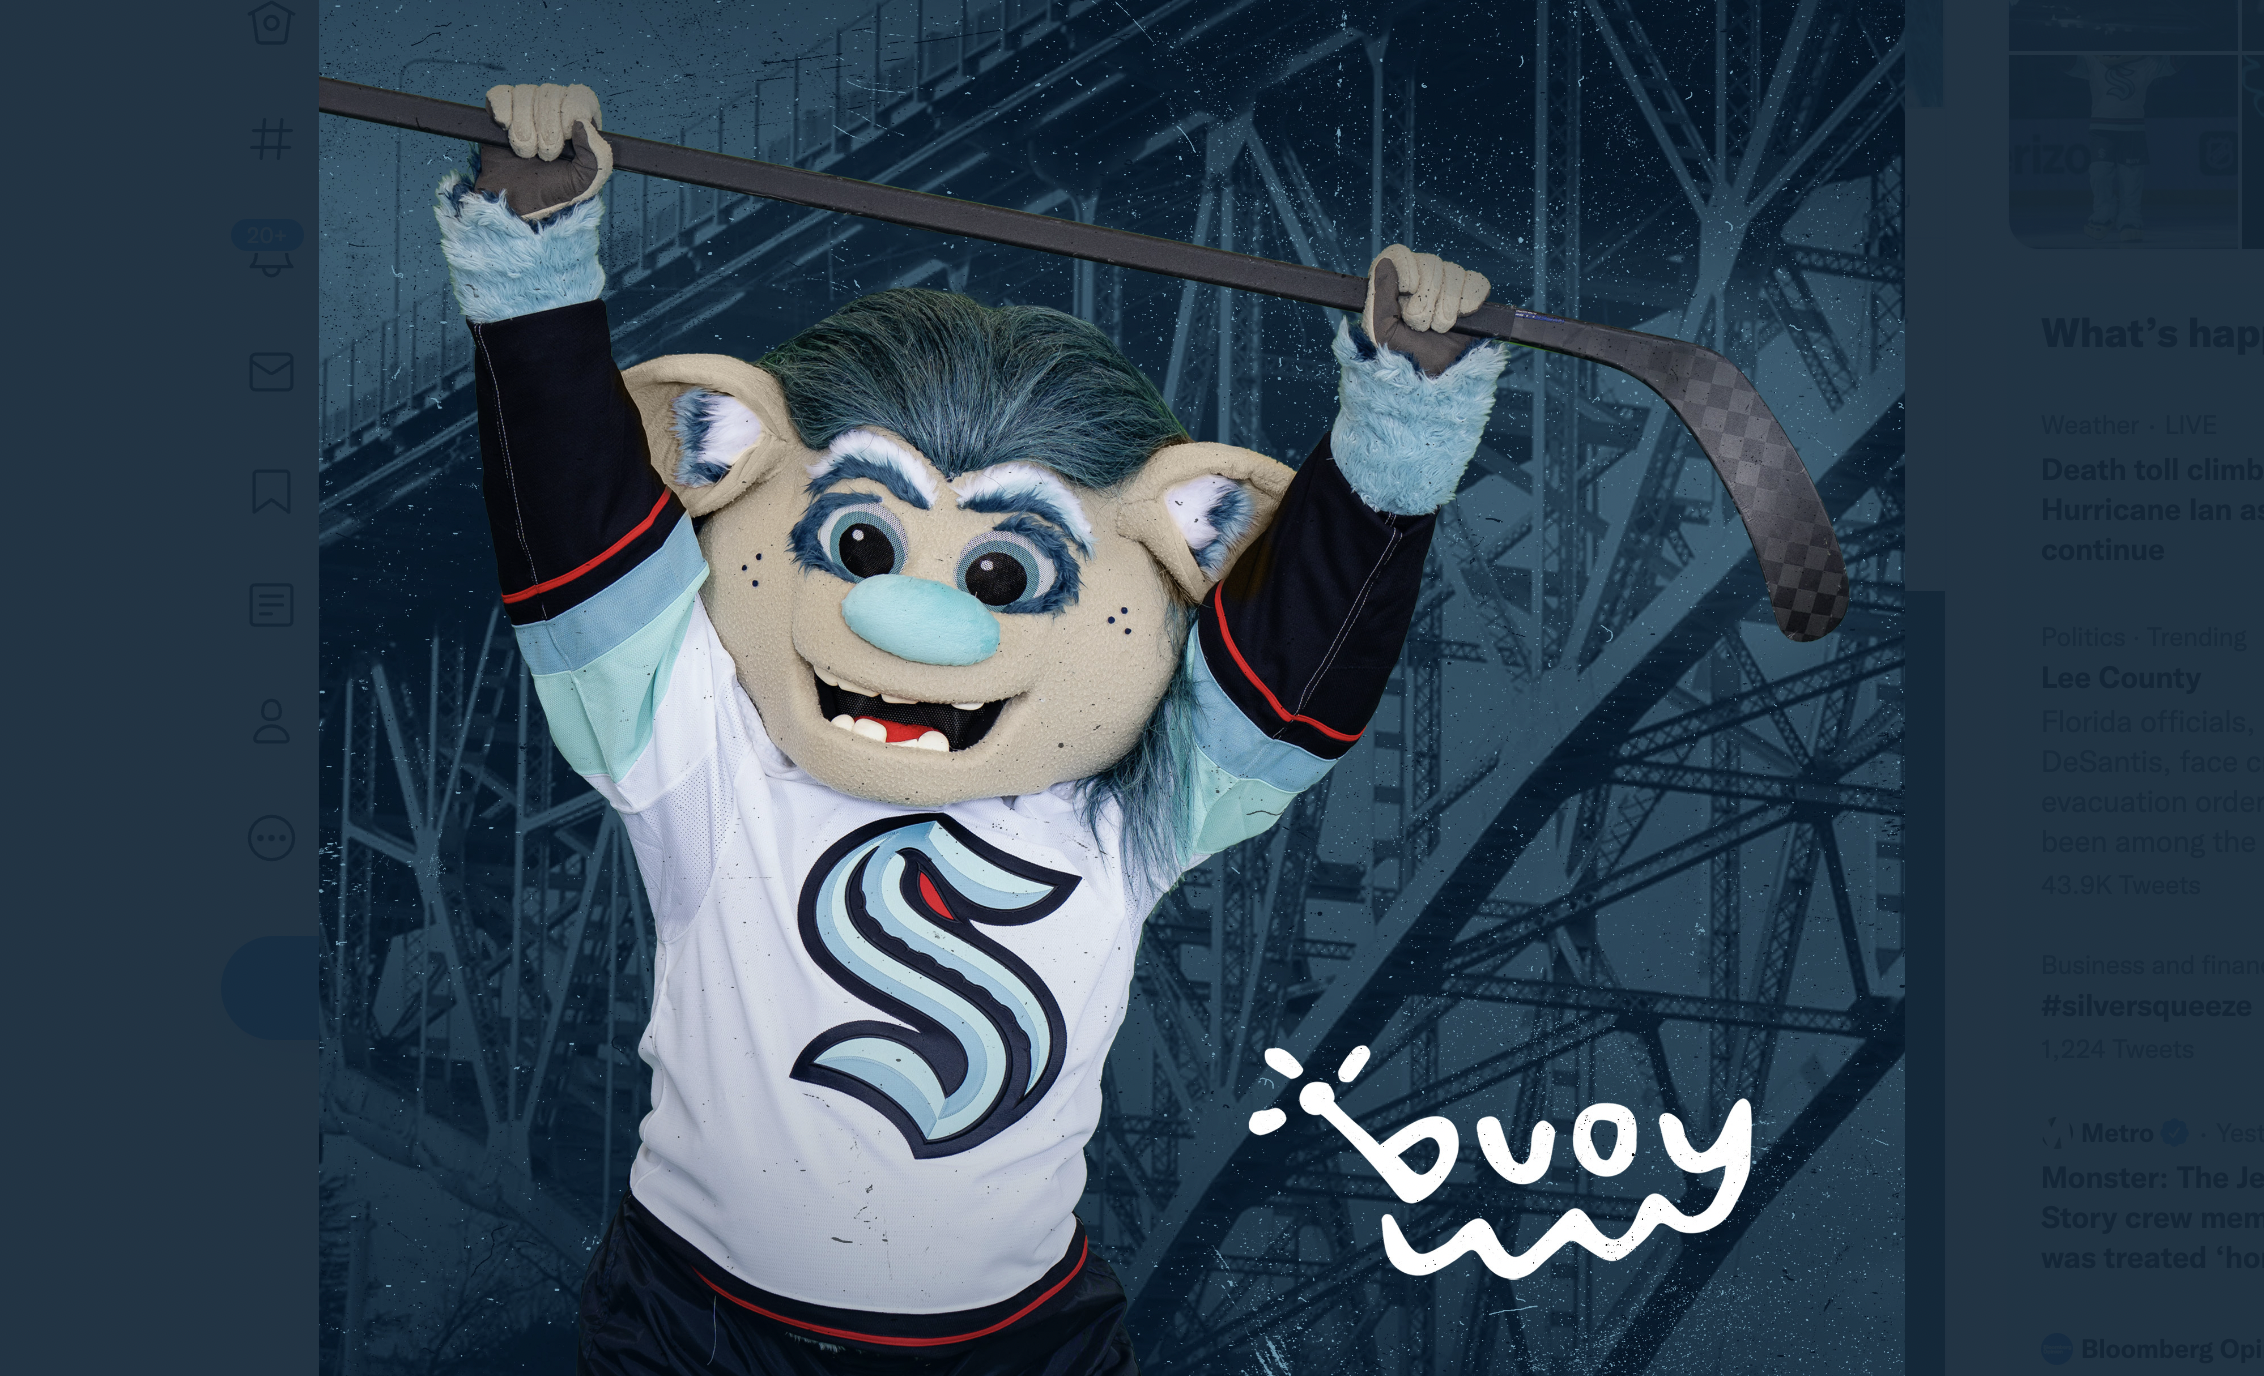 Seattle Kraken unveil new mascot which is not actually a sea